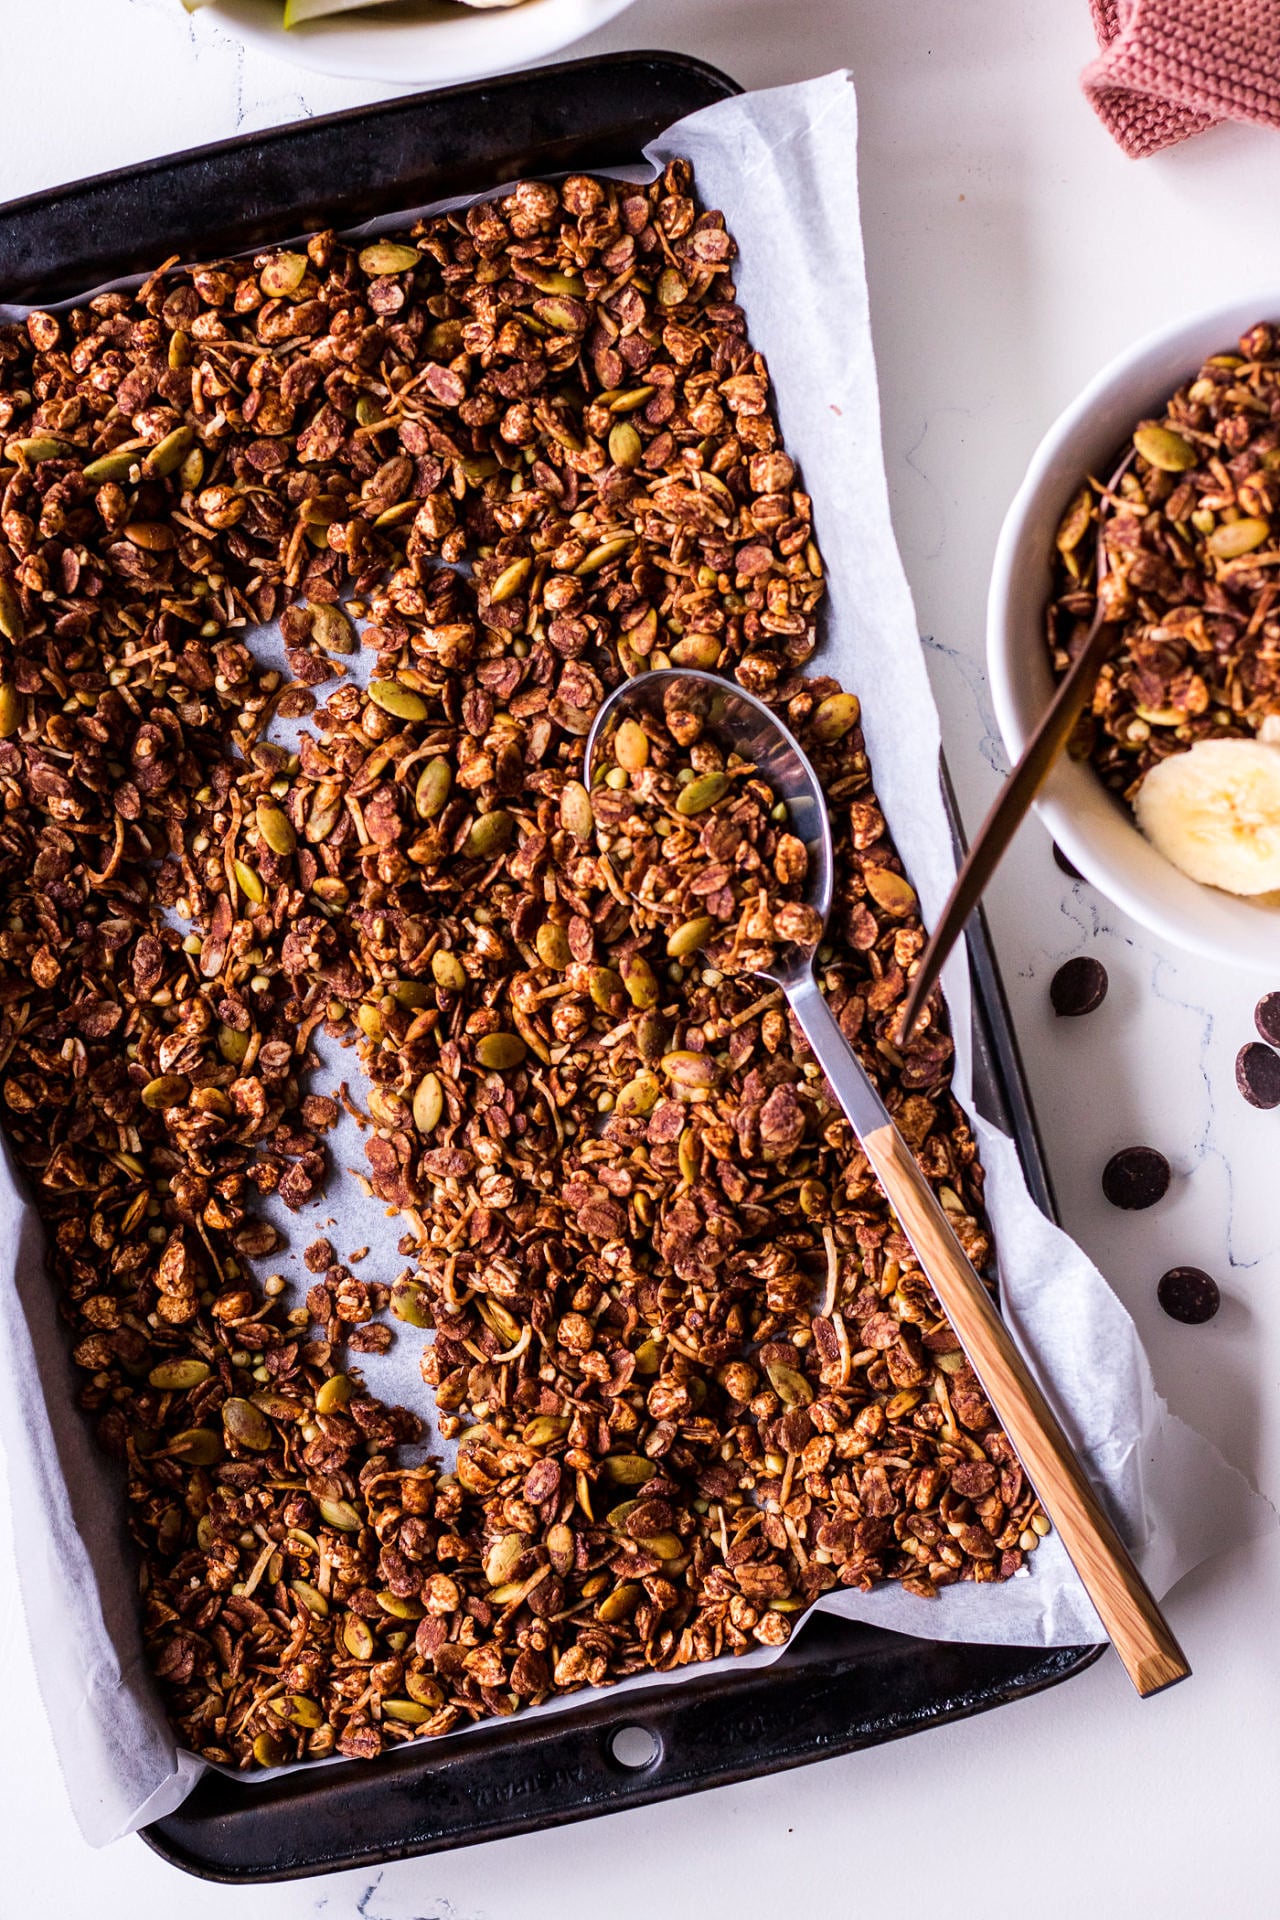 Baking tray filled with chocolate olive oil granola with a wooden handled spoon, small white cereal bowl to the side